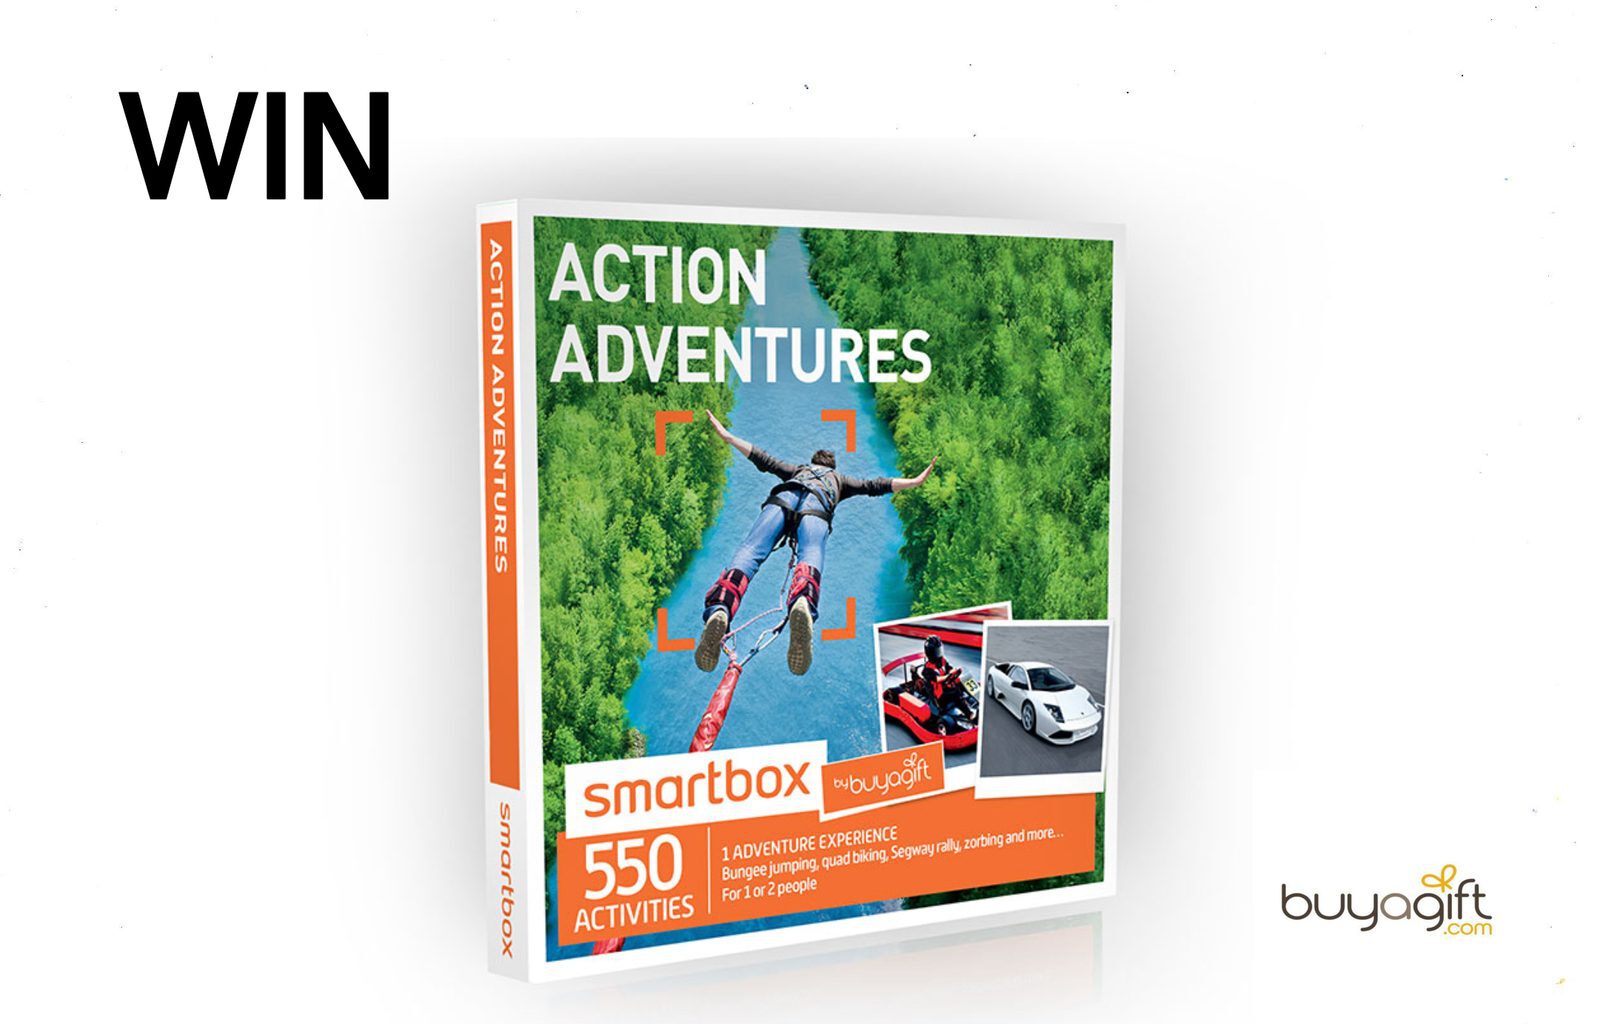 WIN 2x Action Adventures by buyagift » The MALESTROM